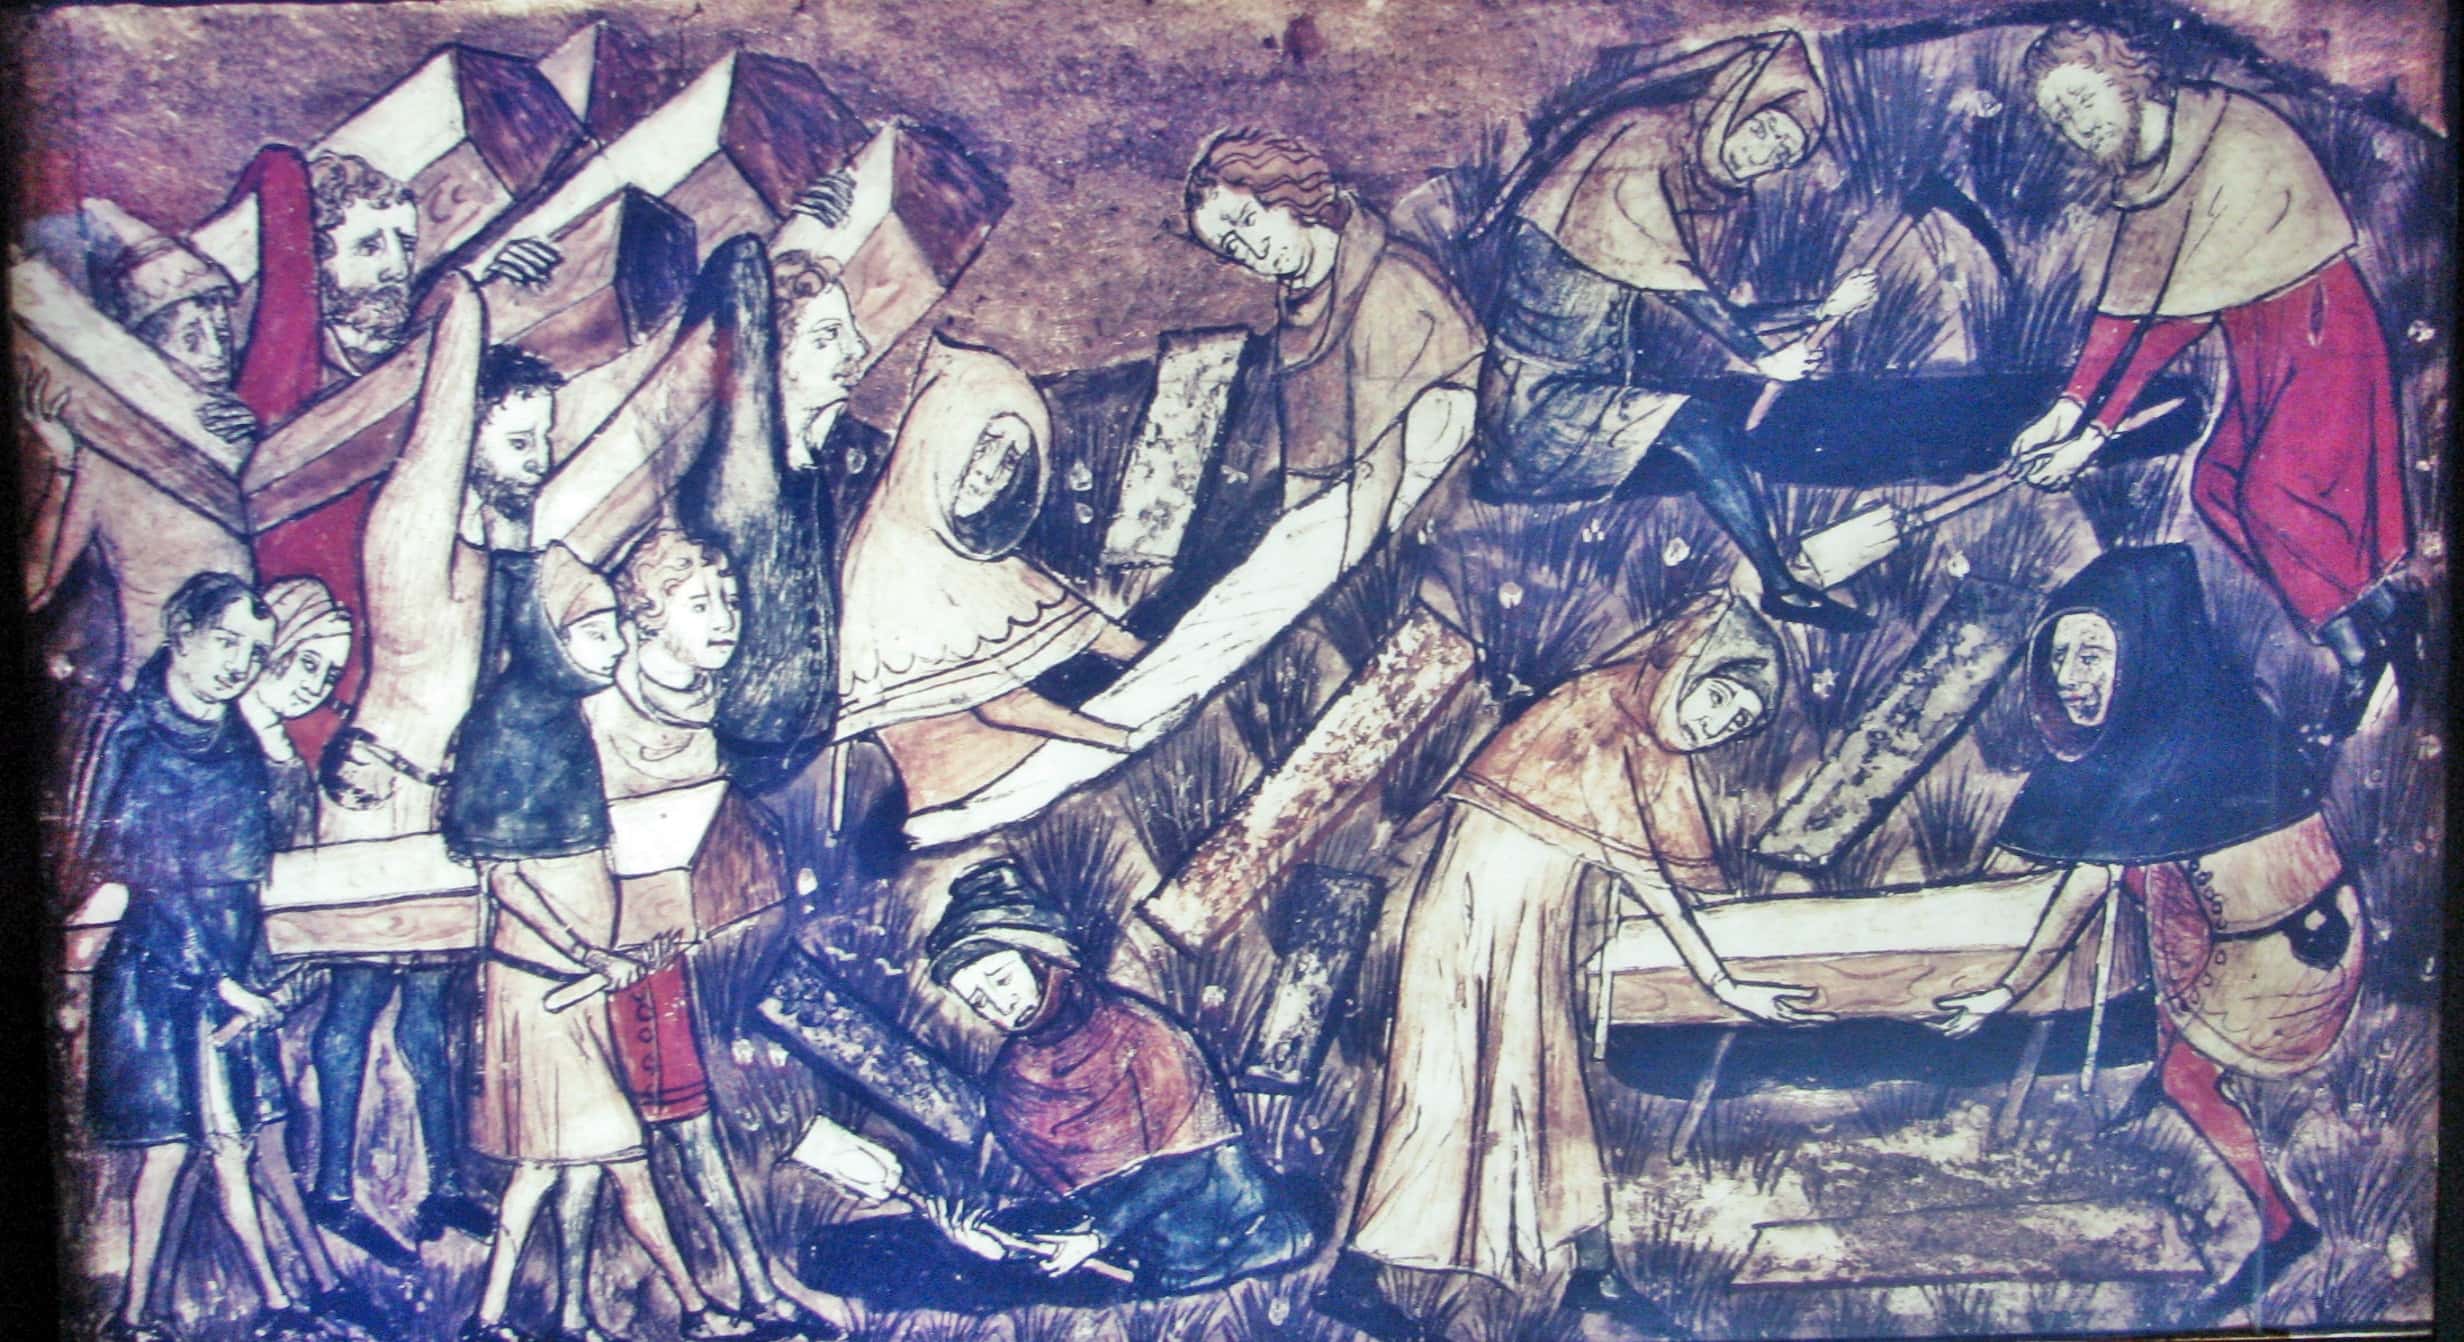 The Black Death Facts